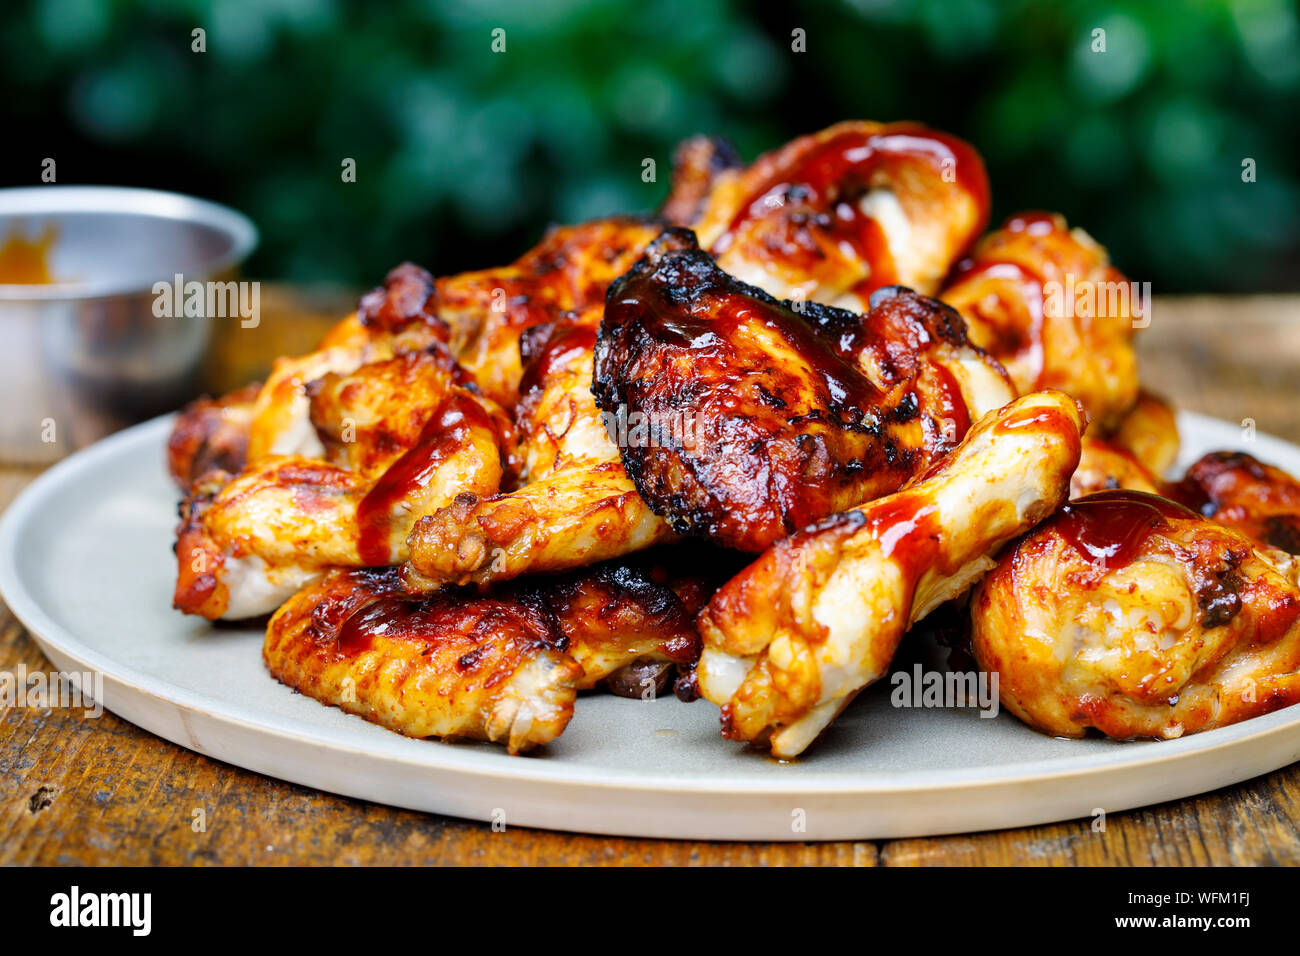 Barbecue chicken wings and drumsticks with sauce Stock Photo